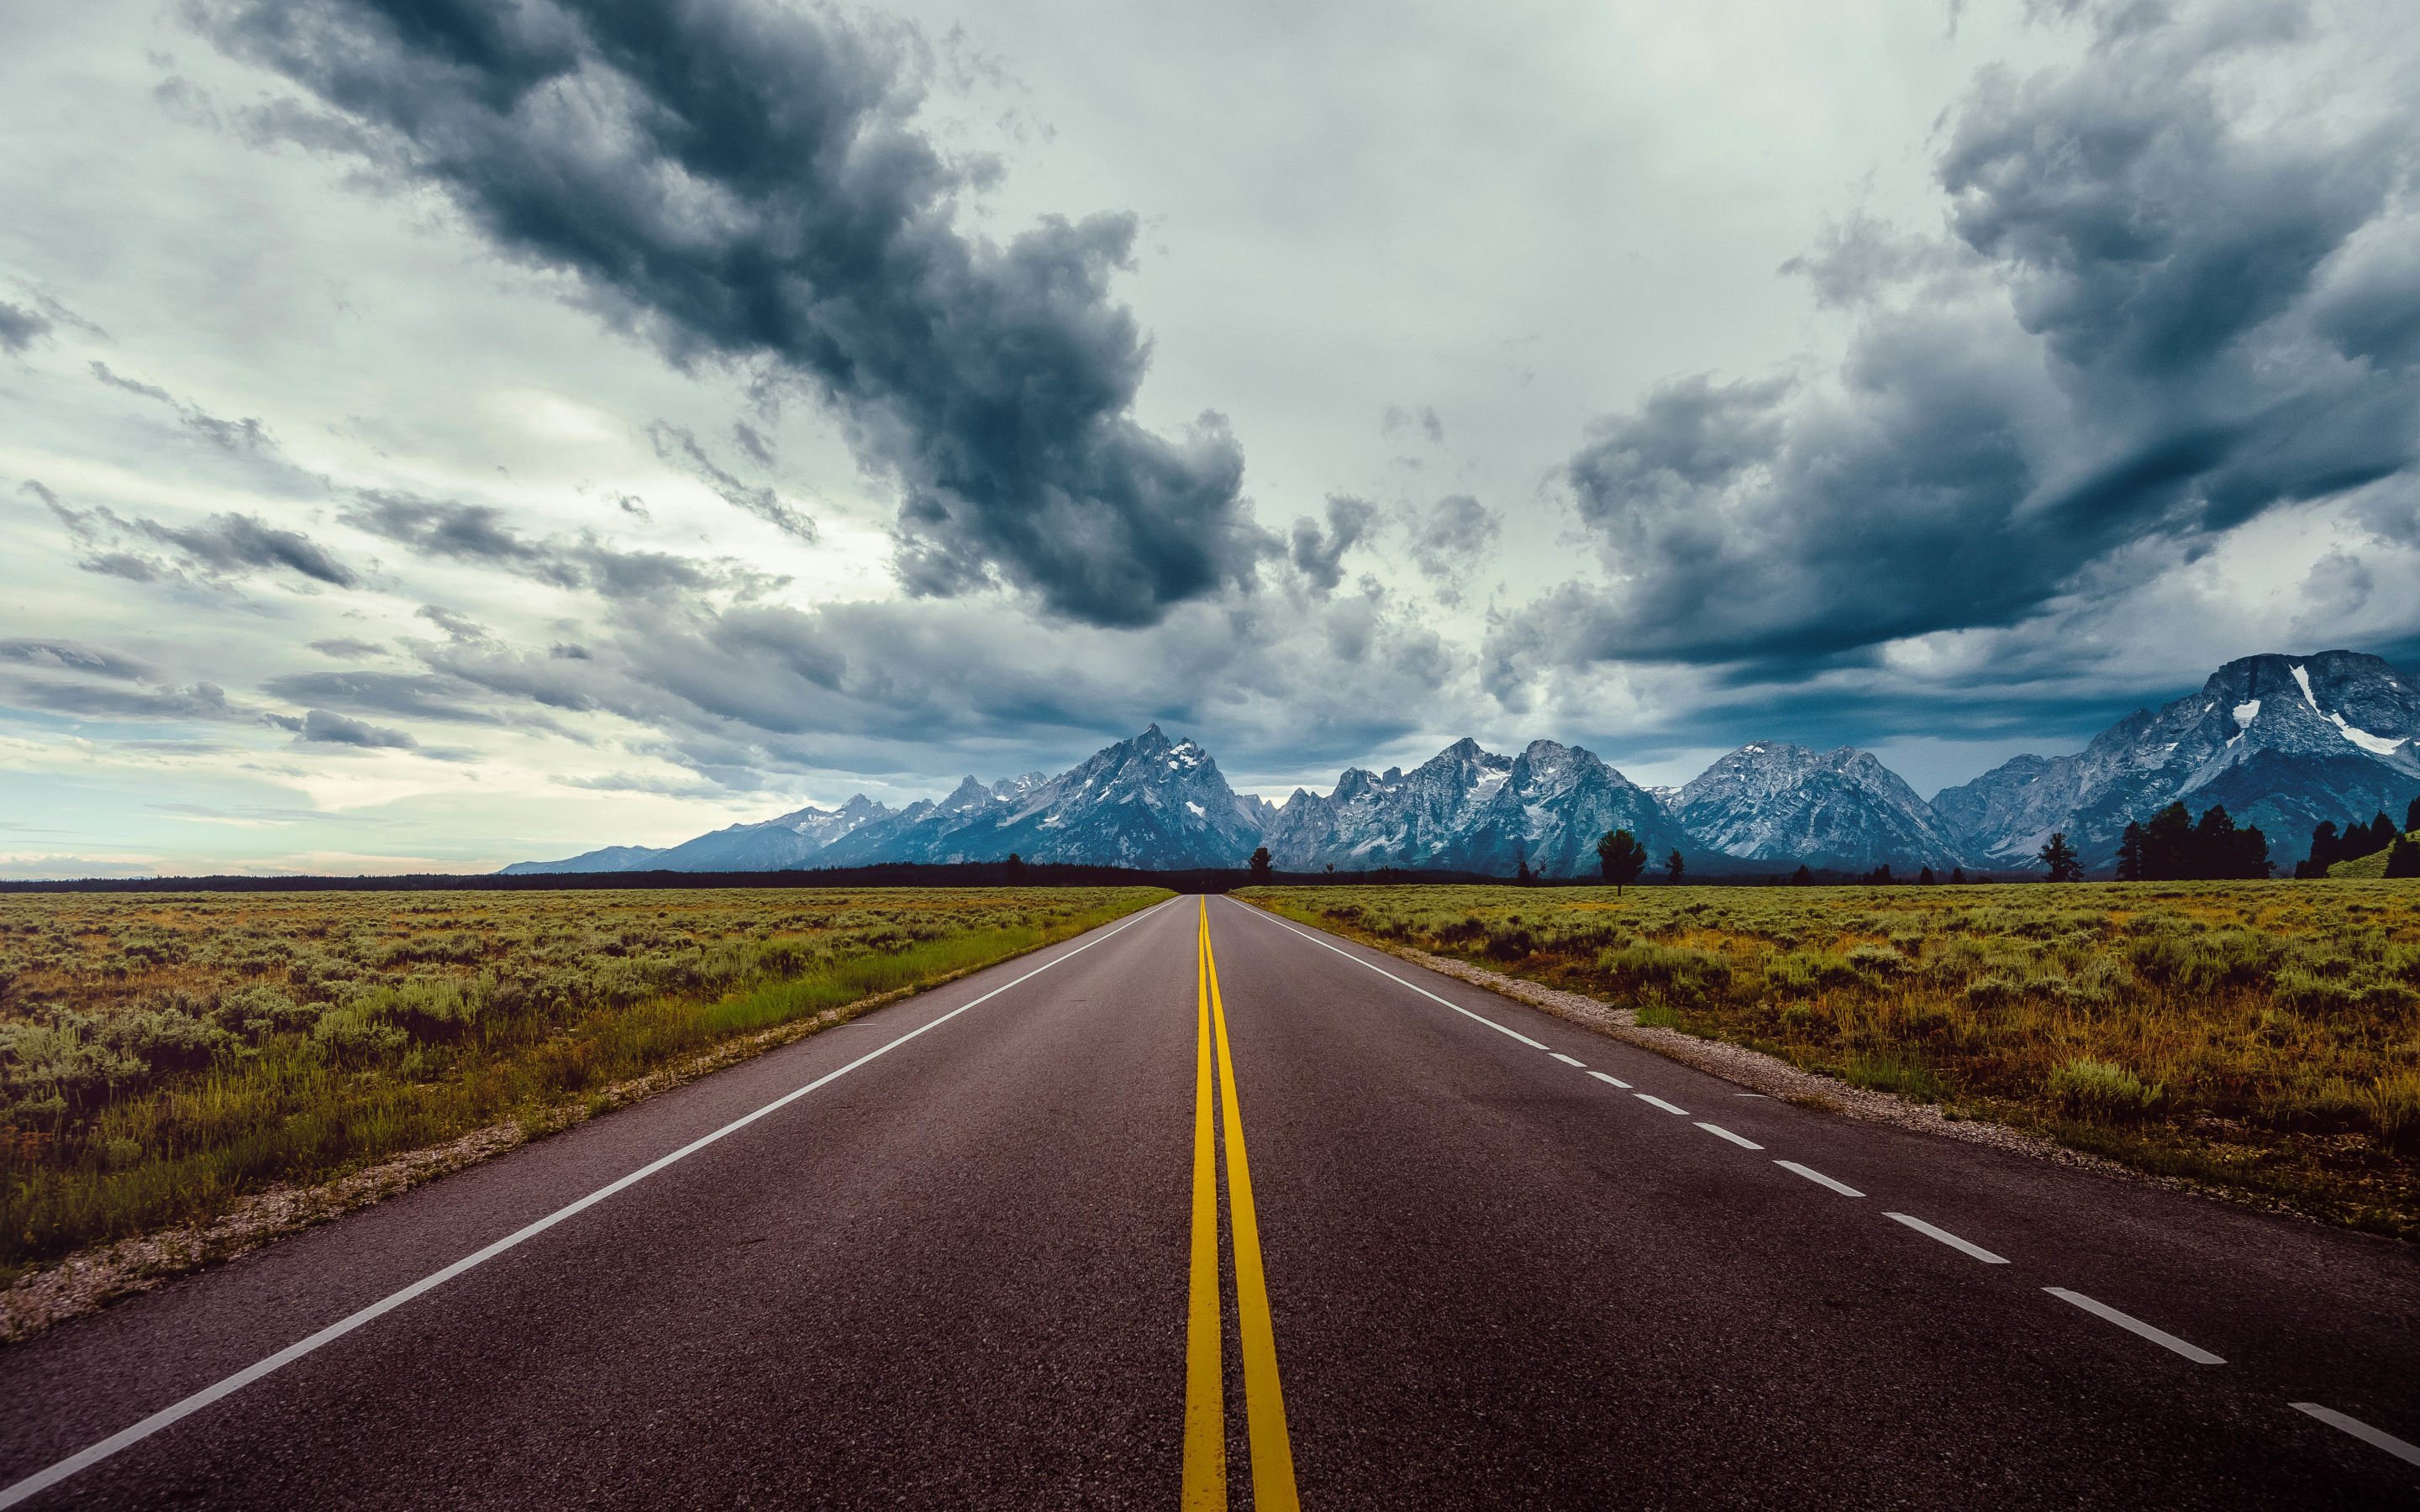 Marks, highway, road, landscape, mountains, clouds, nature, 2880x1800 wallpaper